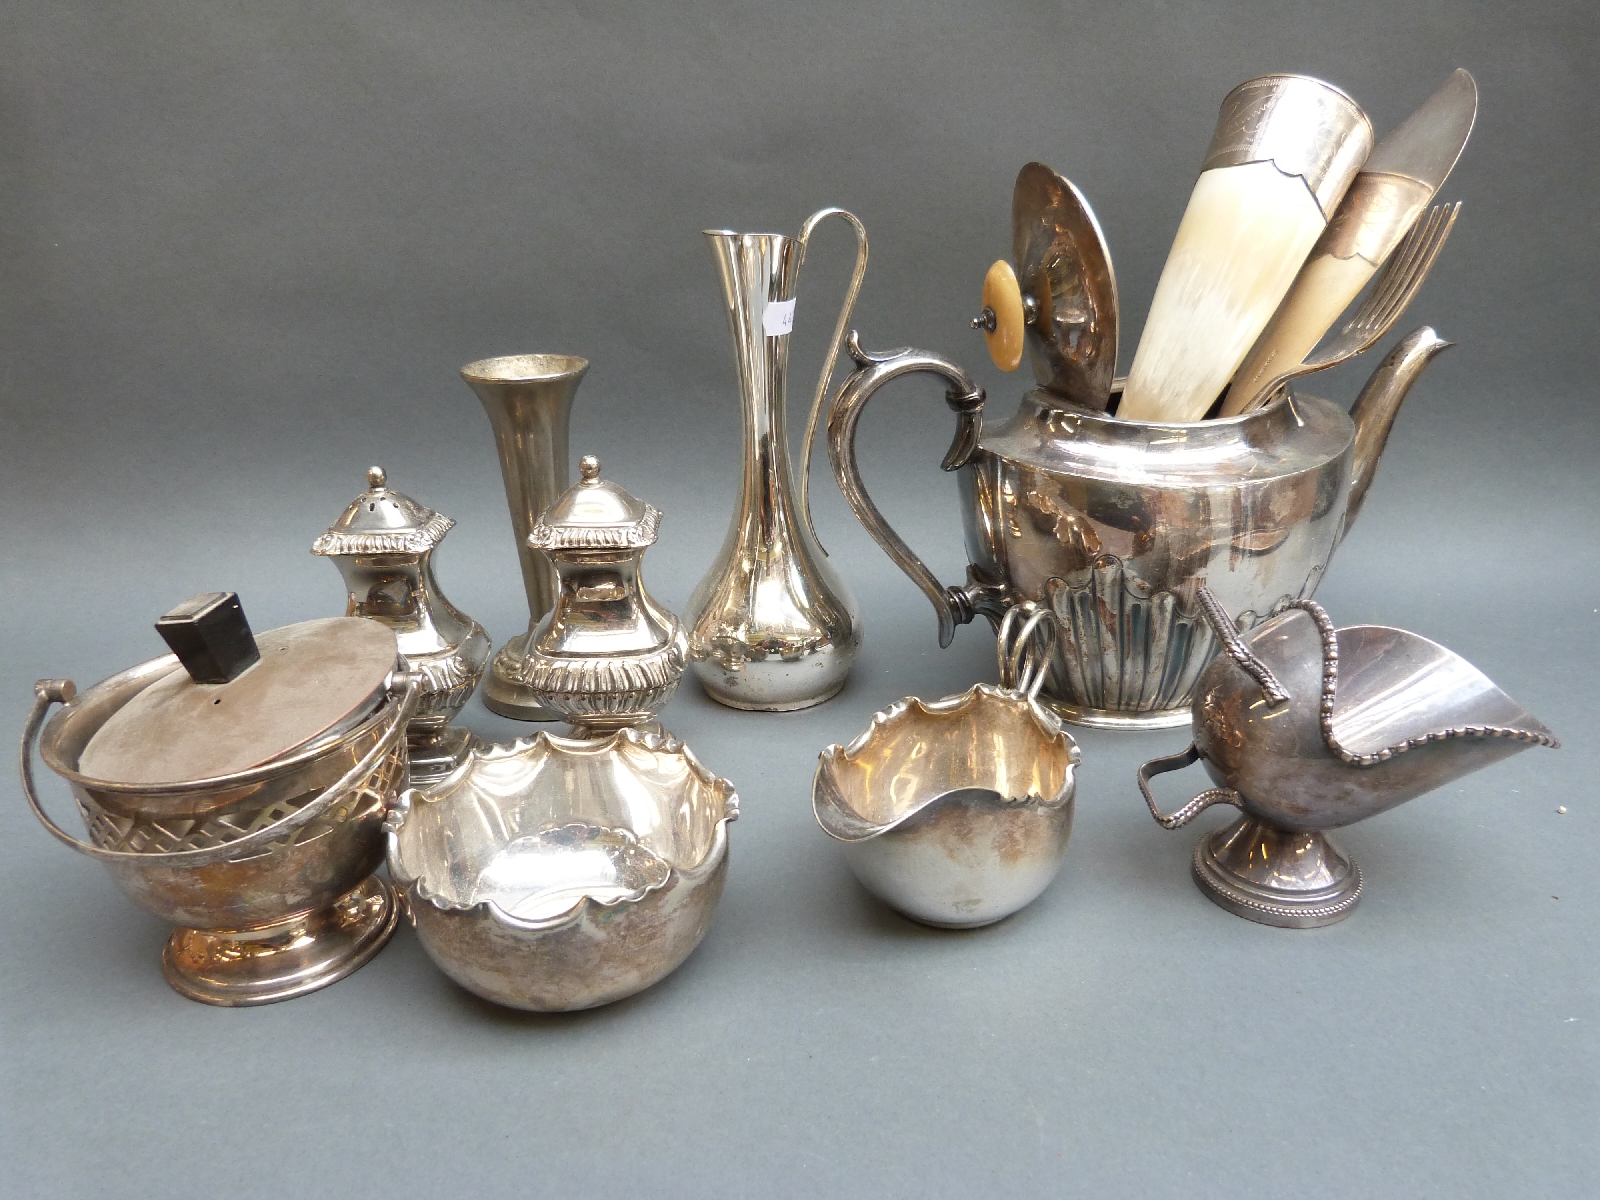 A collection of plated ware including candleabras, one with four branches; tray, fish servers, - Image 2 of 4